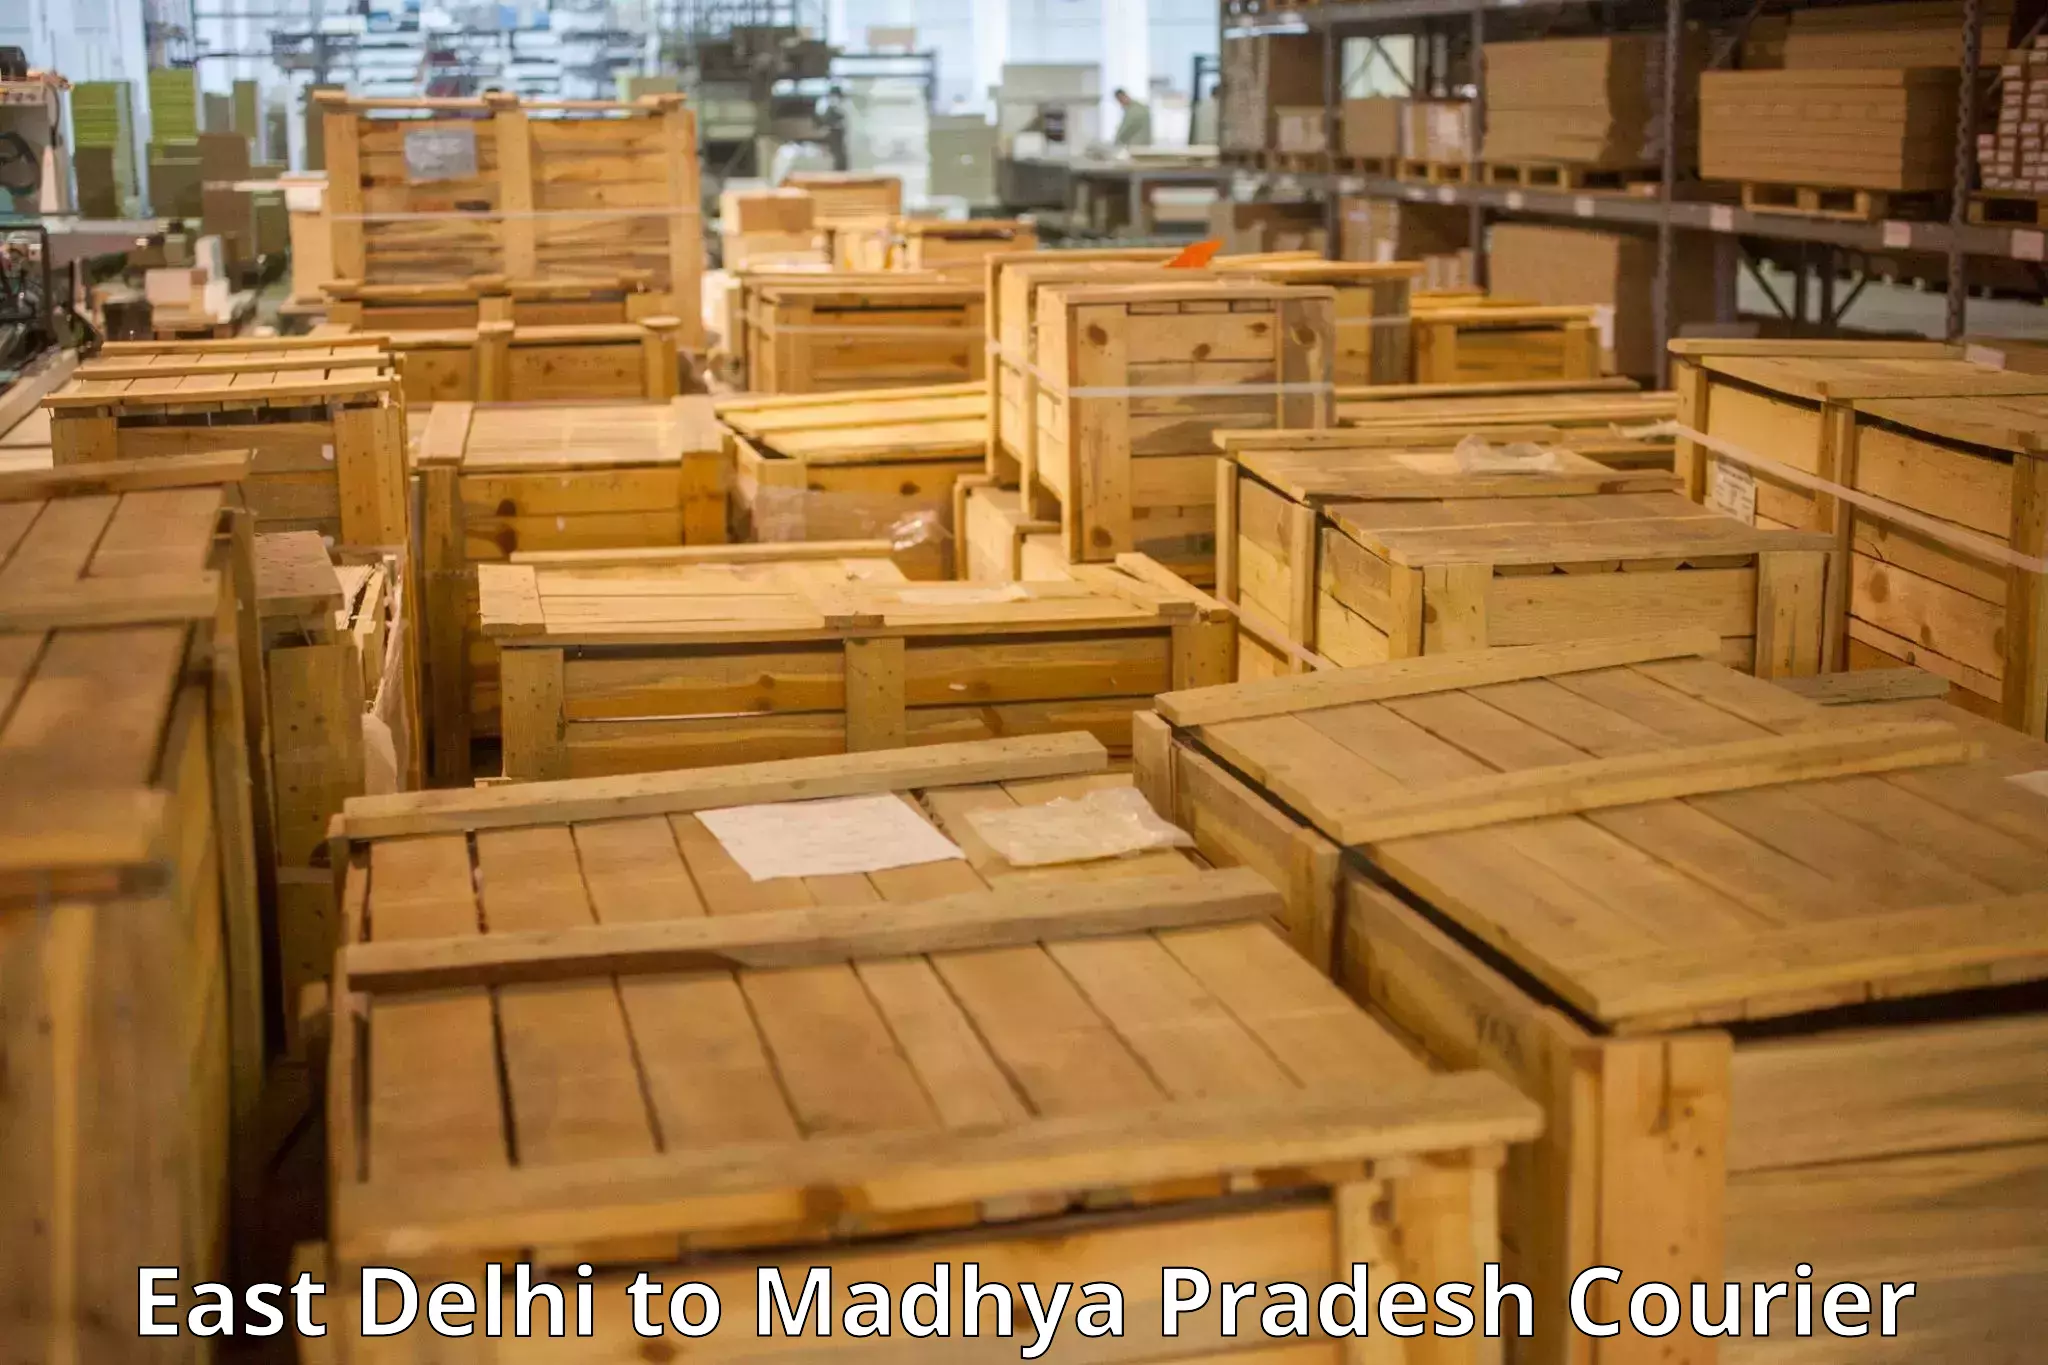 Luggage shipping guide East Delhi to Jawad Neemuch